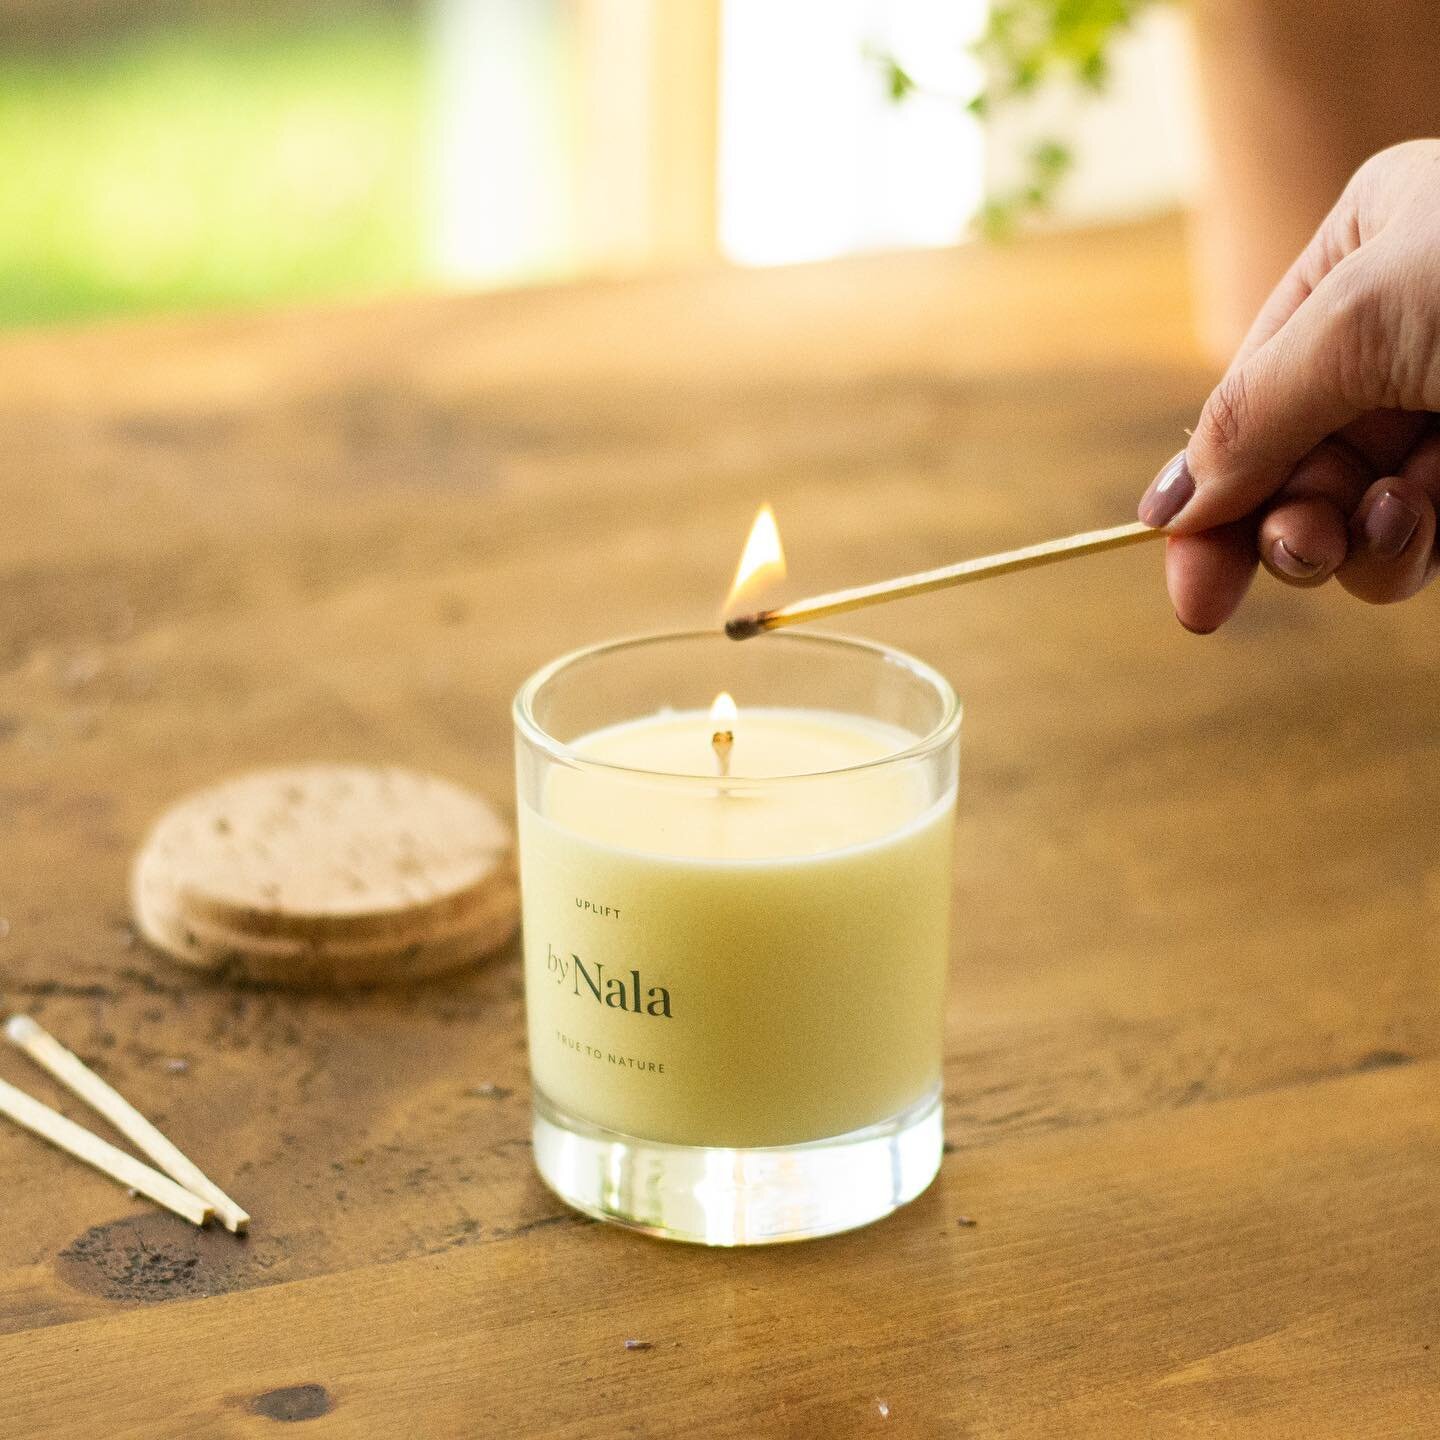 Good morning 💛

Set yourself up for the day with 5 minutes of mindful breathing with a @bynala_ &lsquo;Uplift&rsquo; candle or diffuser by your side. 

The citrusy notes of Bergamot, Red Mandarin and White grapefruit essential oils have therapeutic 